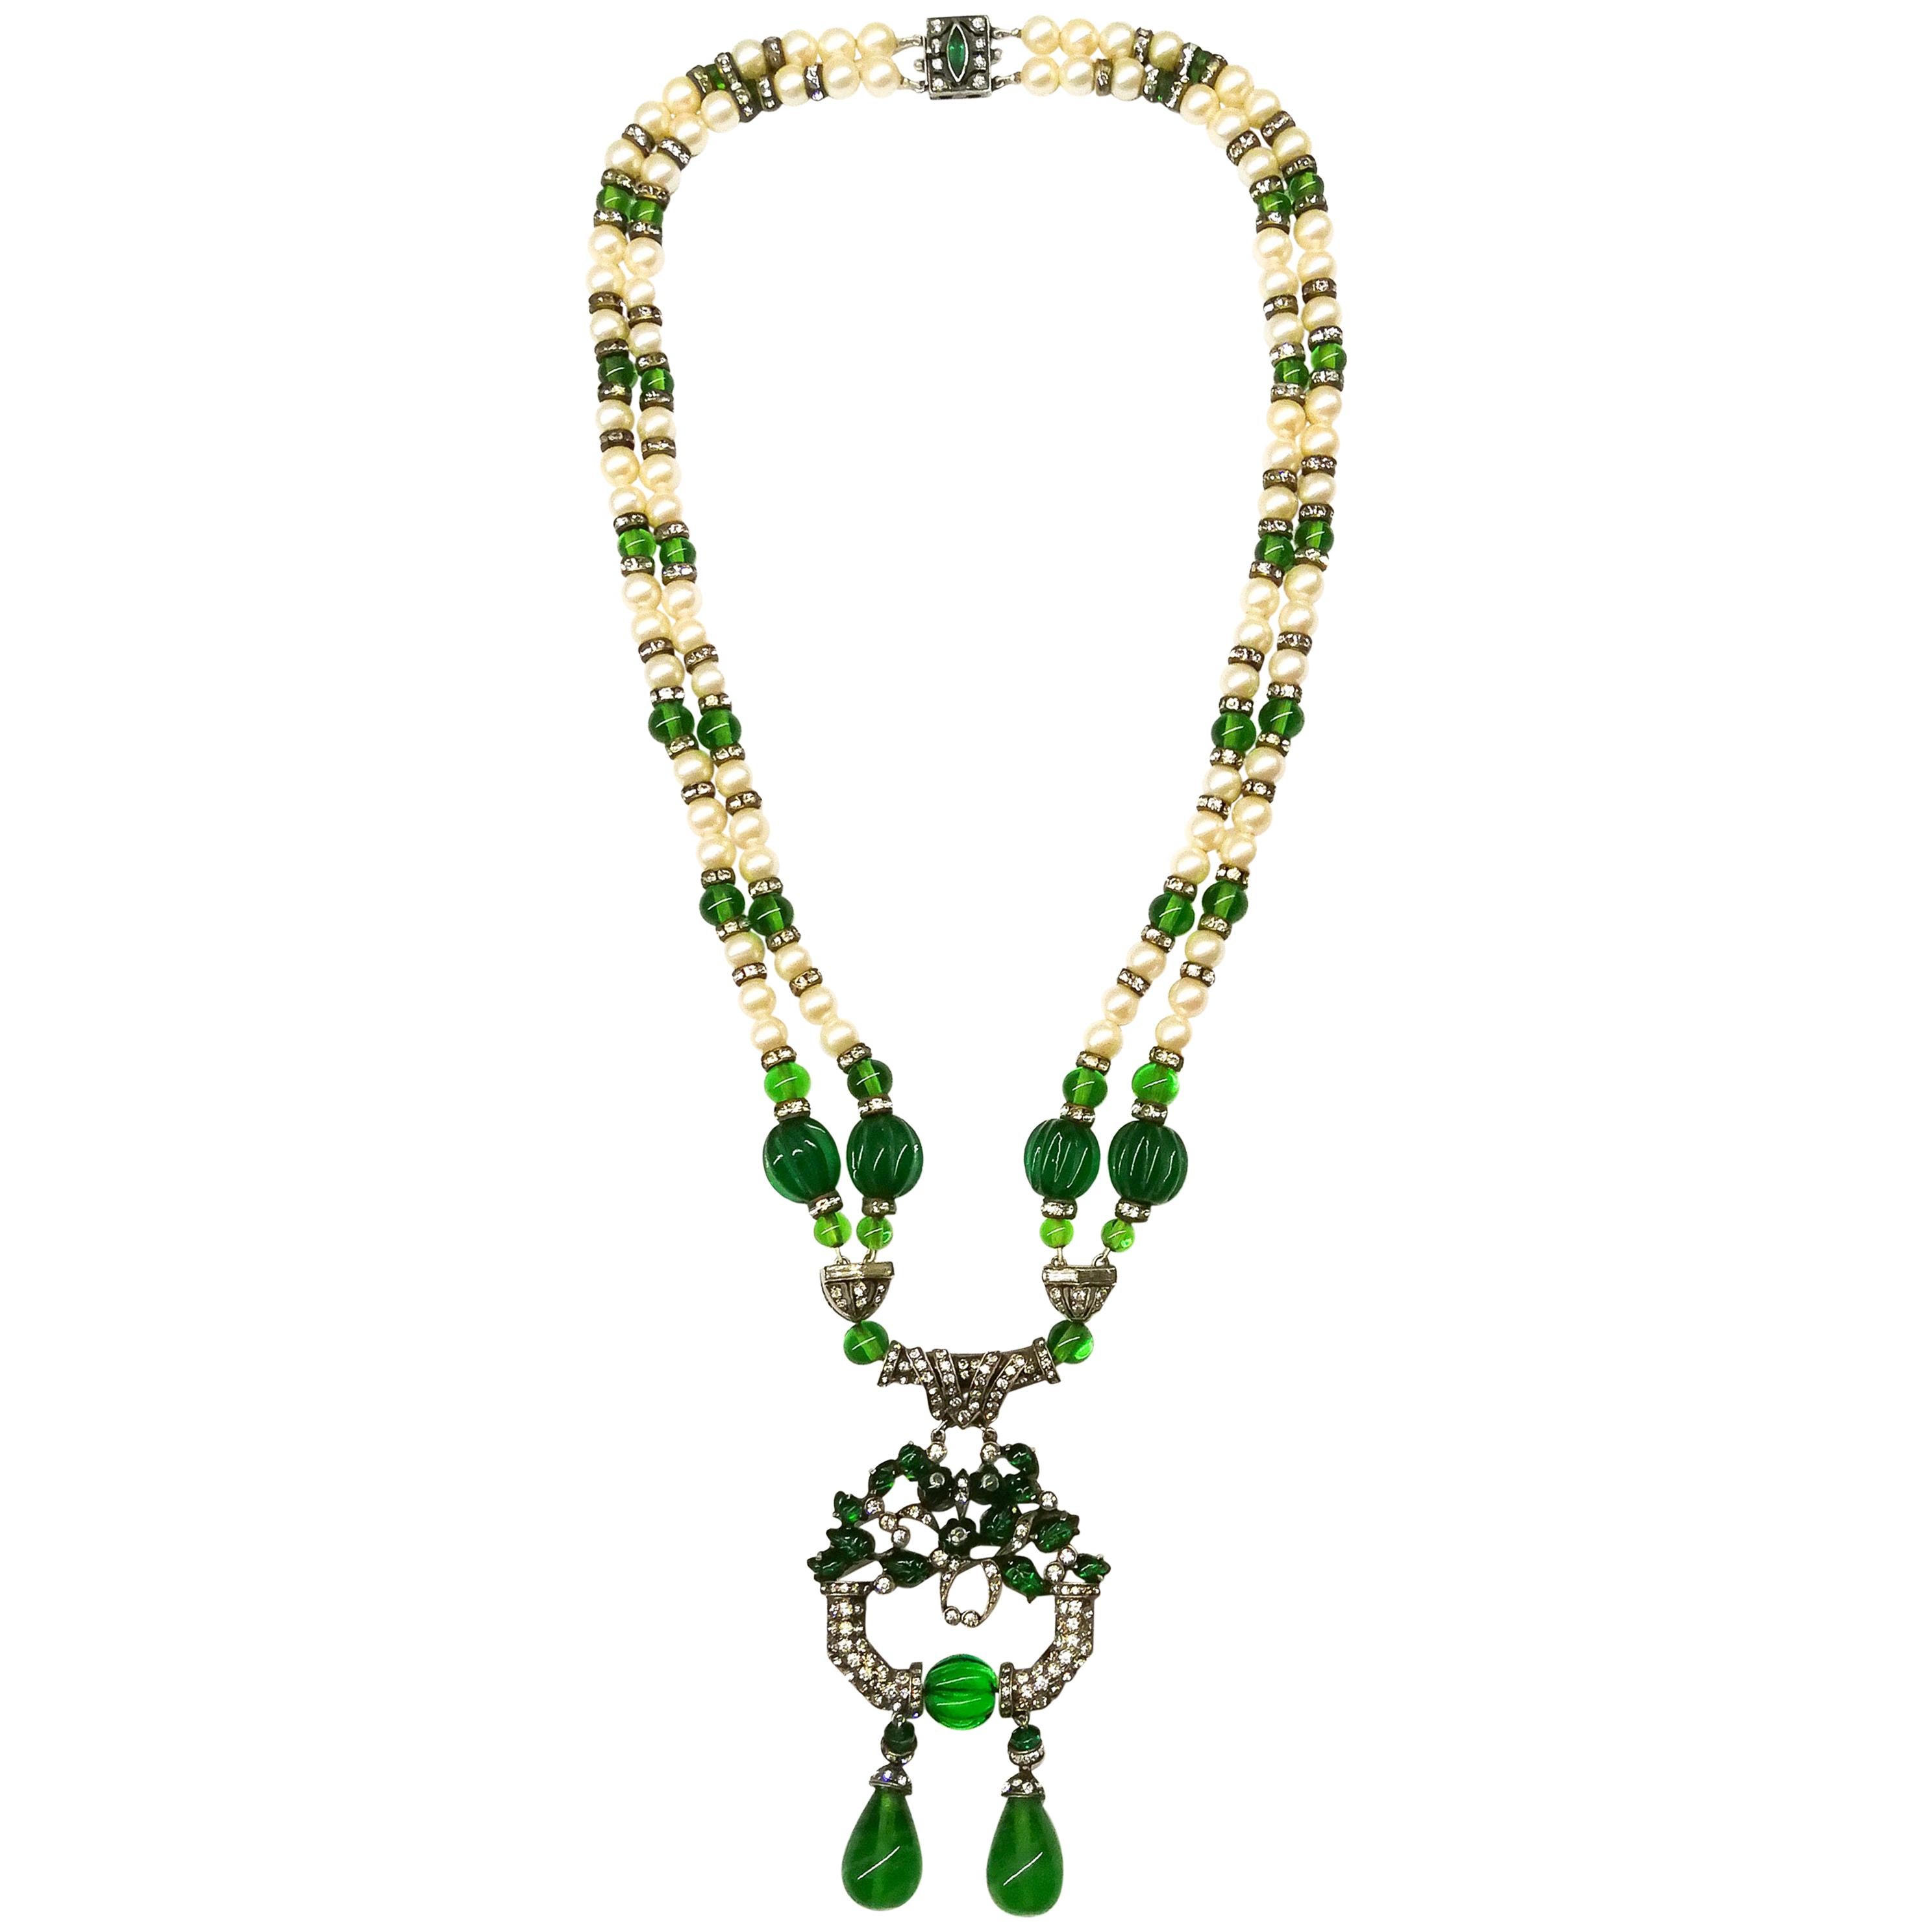 An Art Deco silver, paste and emerald glass sautoir necklace, France, 1920s